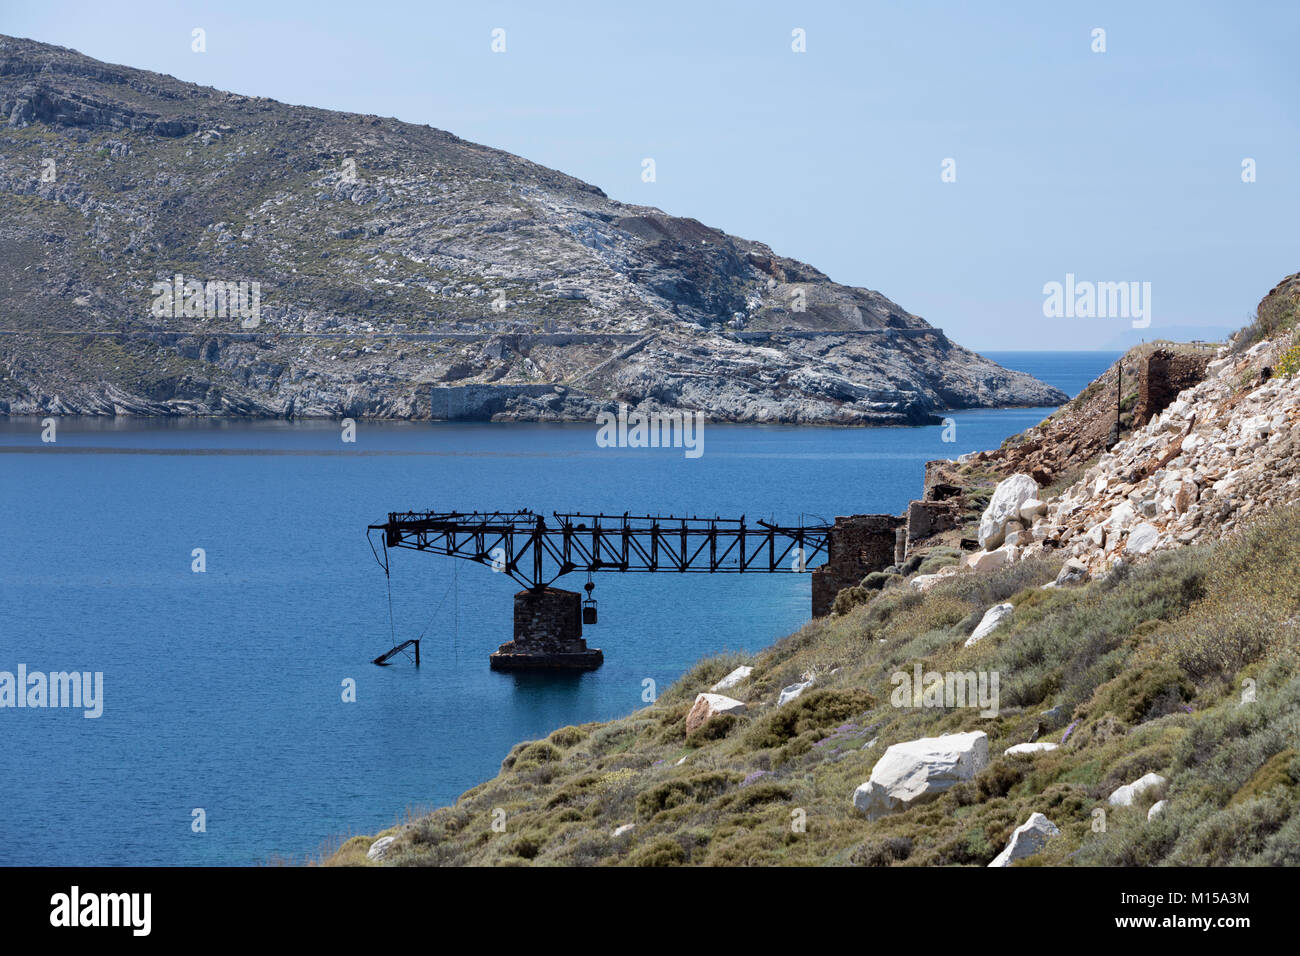 Rusty remains of old mining pier at Koutalas bay on island's south east coast, Serifos, Cyclades, Aegean Sea, Greek Islands, Greece, Europe Stock Photo